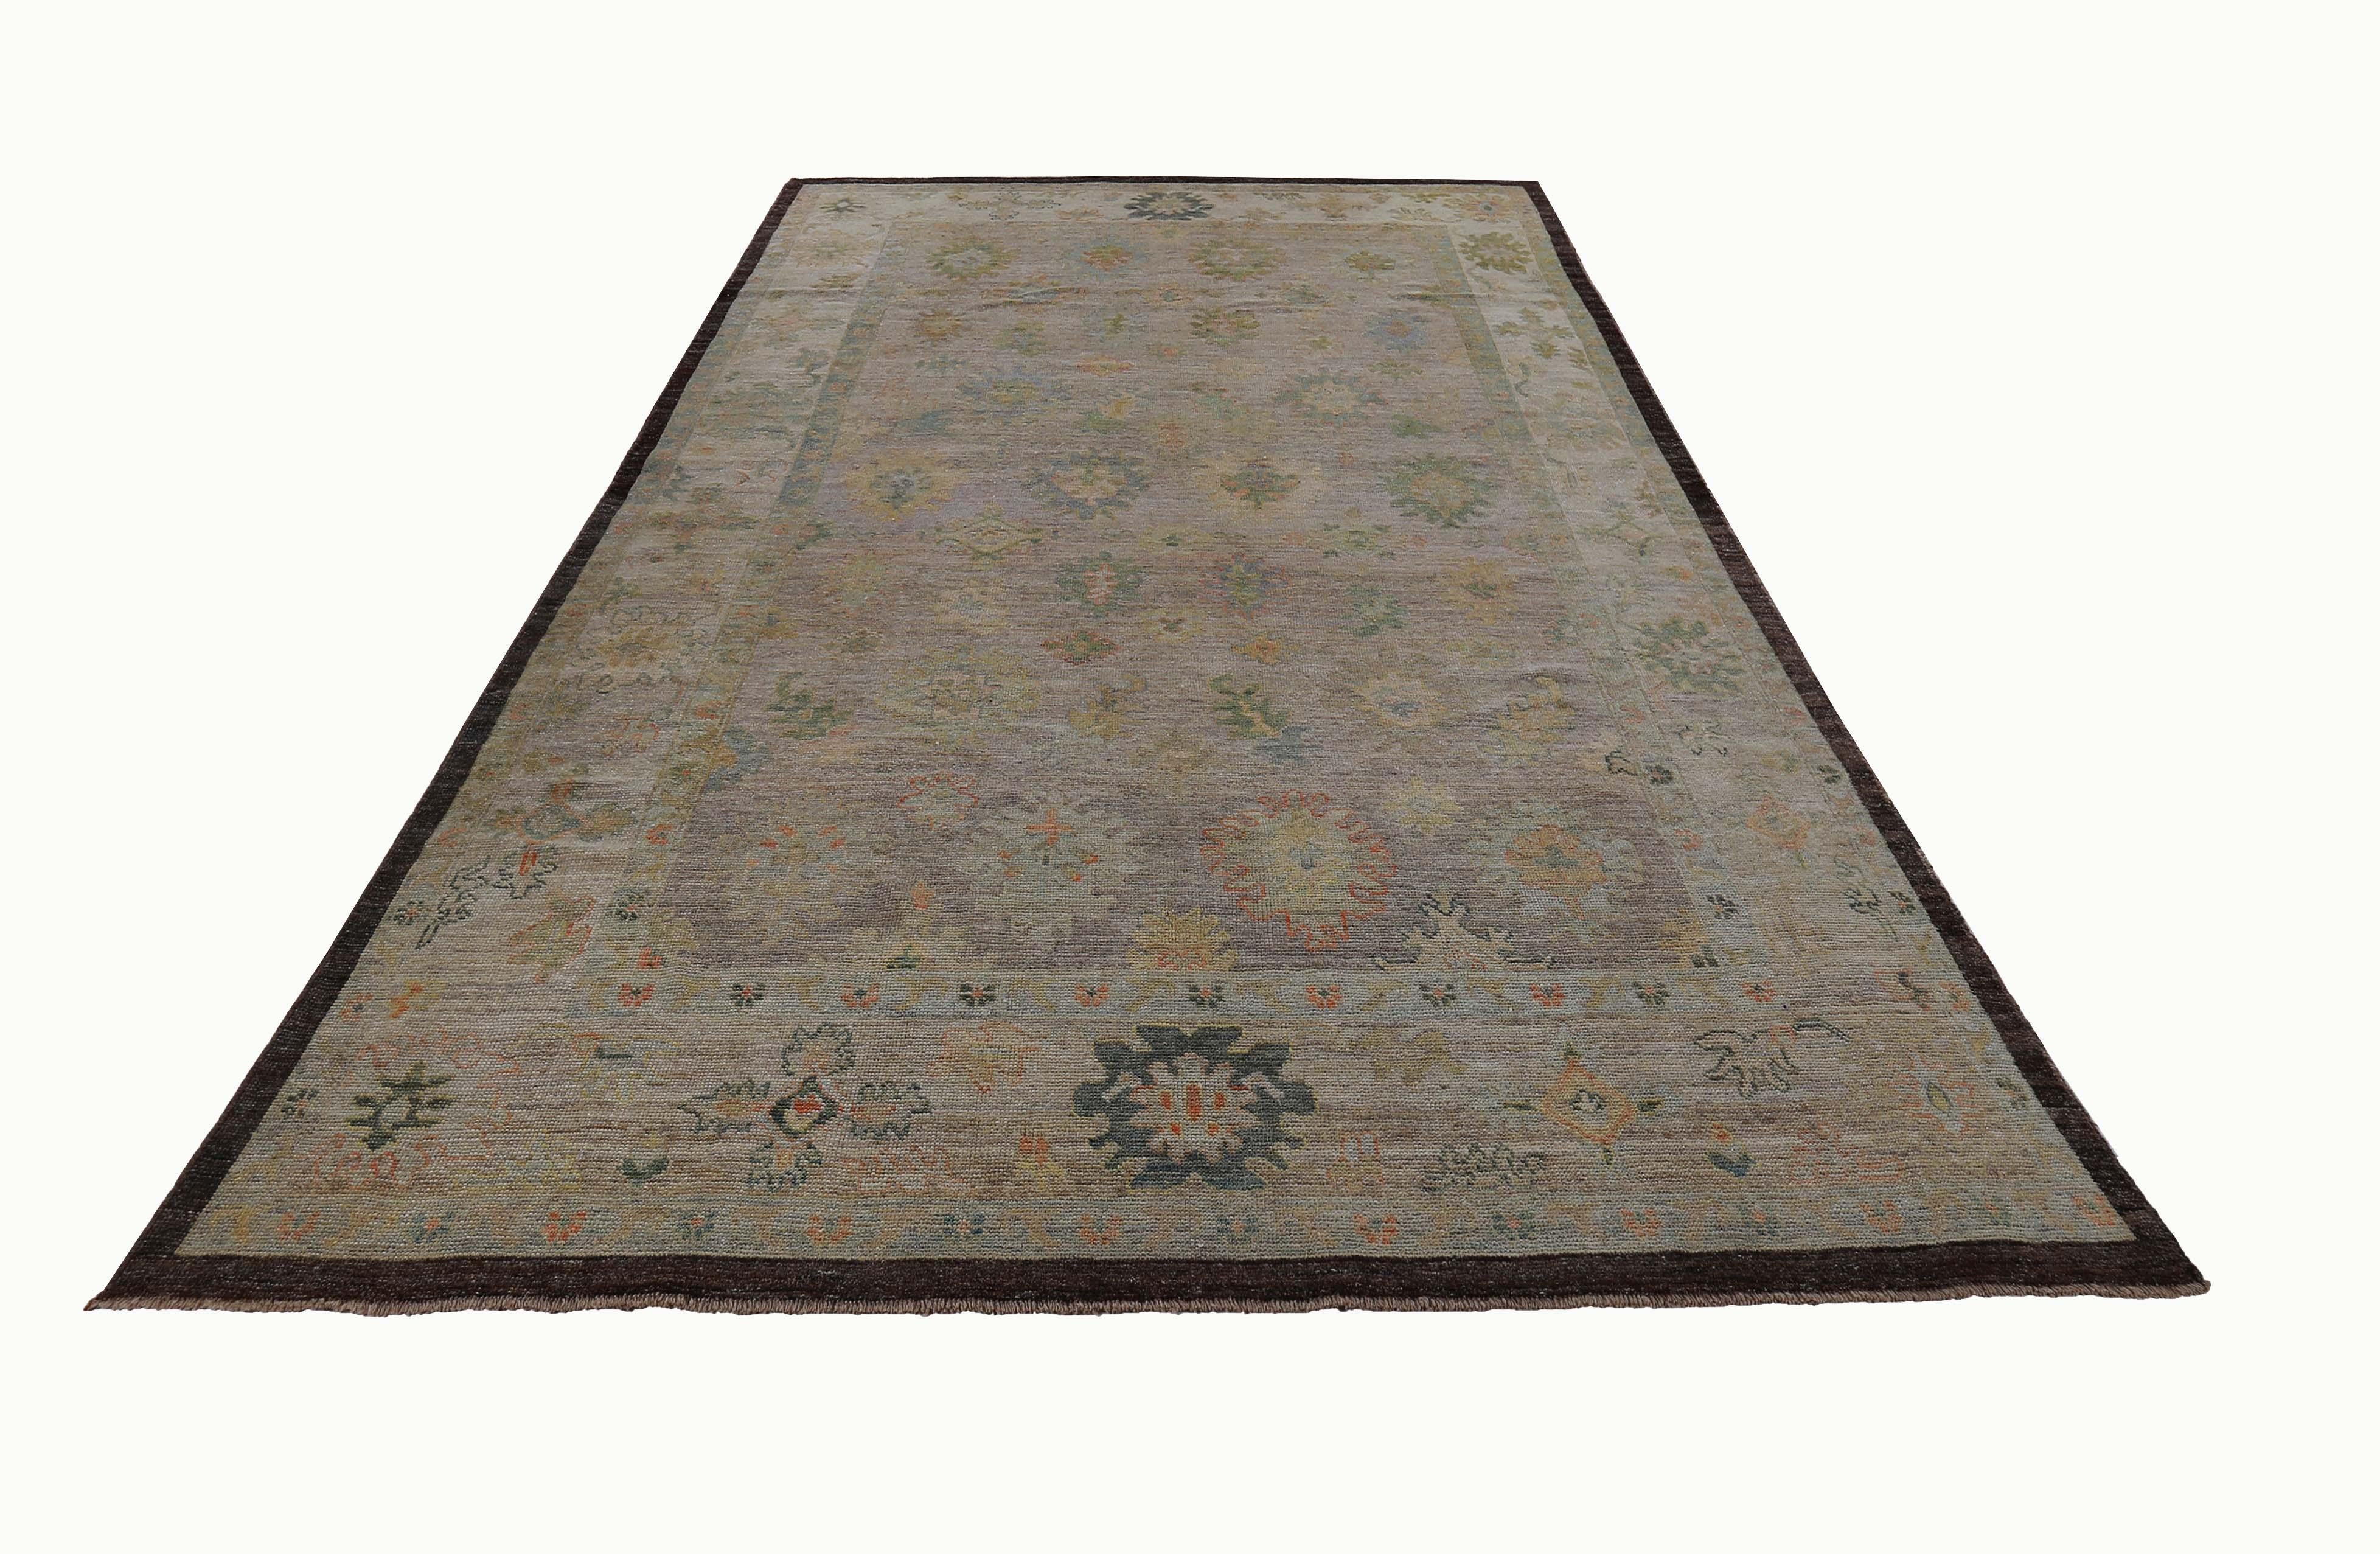 New Turkish rug made of handwoven sheep’s wool of the finest quality. It’s colored with organic vegetable dyes that are certified safe for humans and pets alike. It features floral details in blue and green over a brown field. Flower patterns are